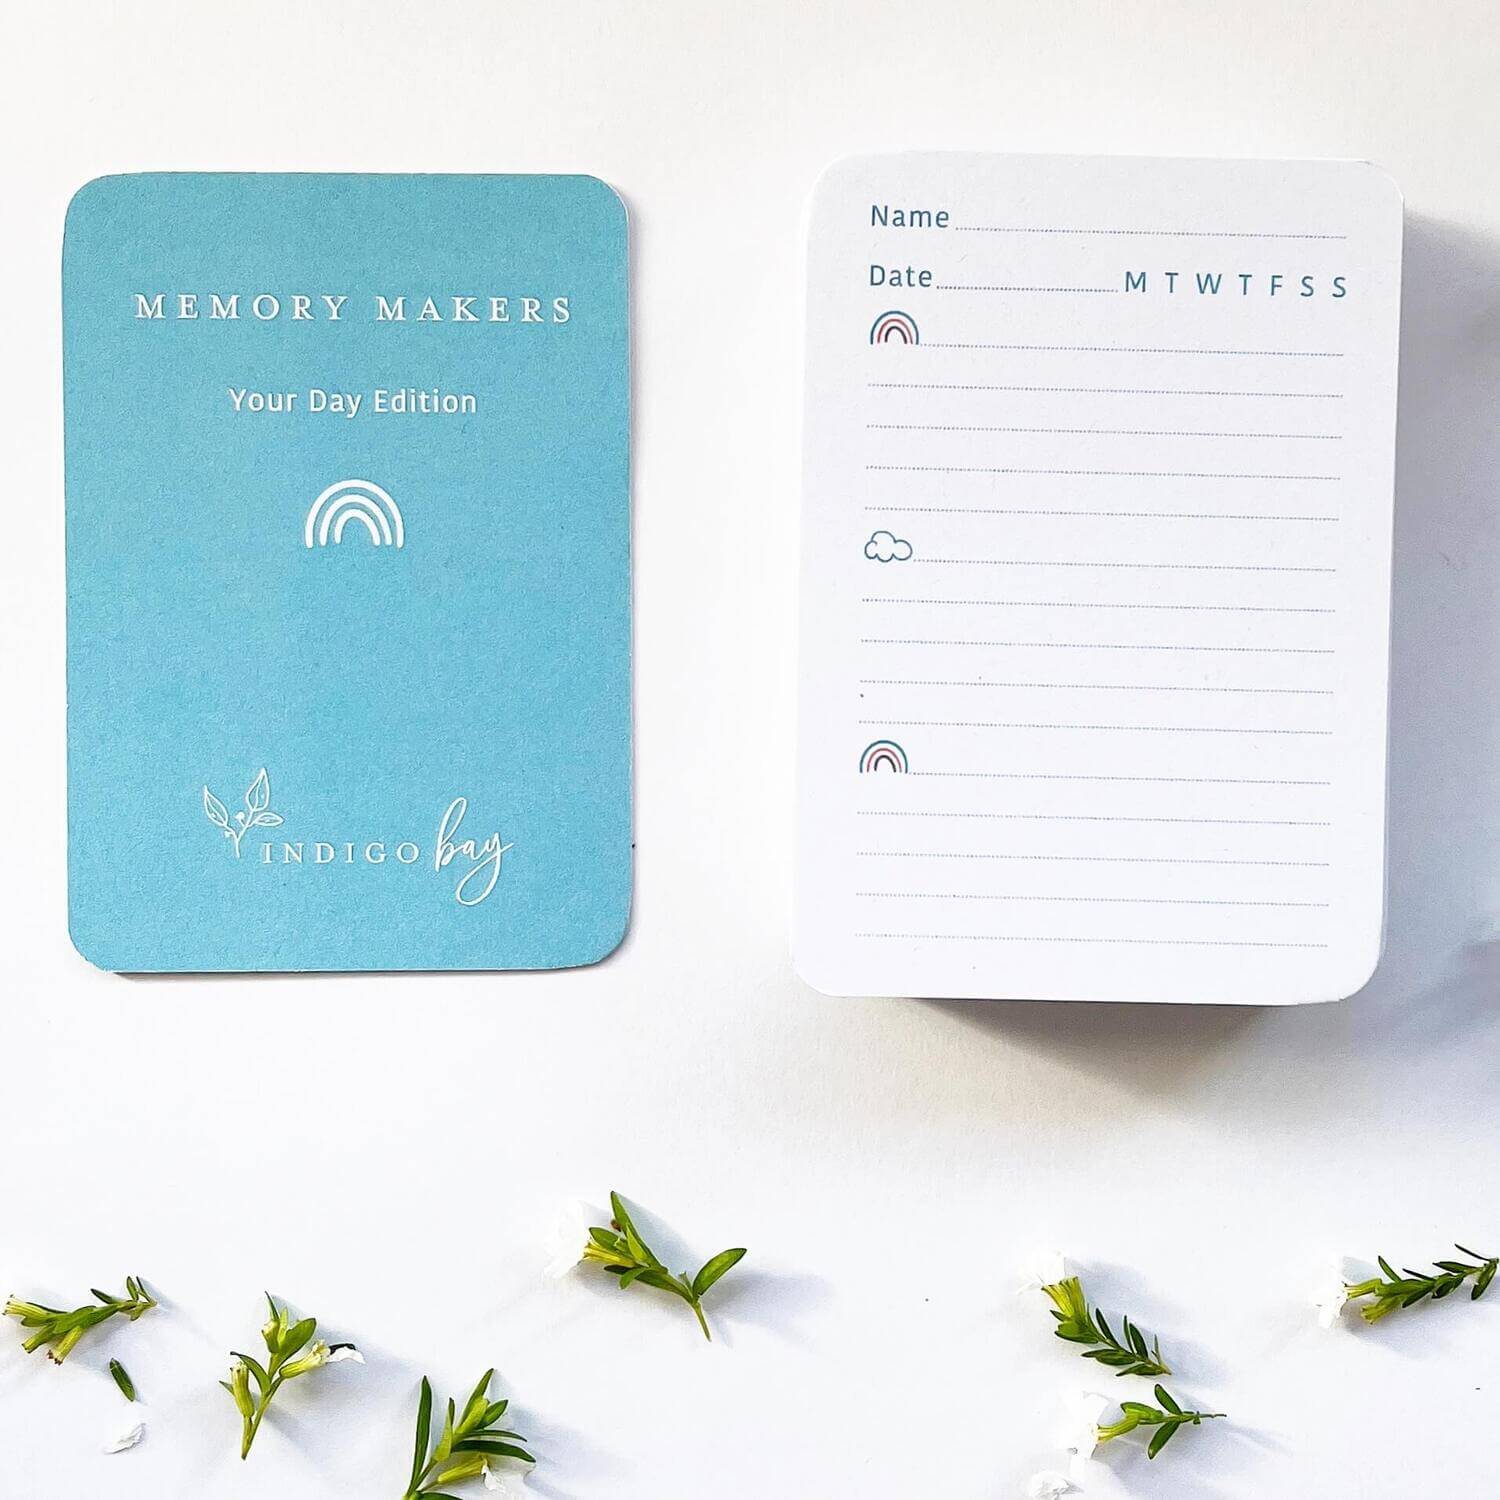 Memory Makers Your Day Edition title card and sample card | Journal cards to encourage connection